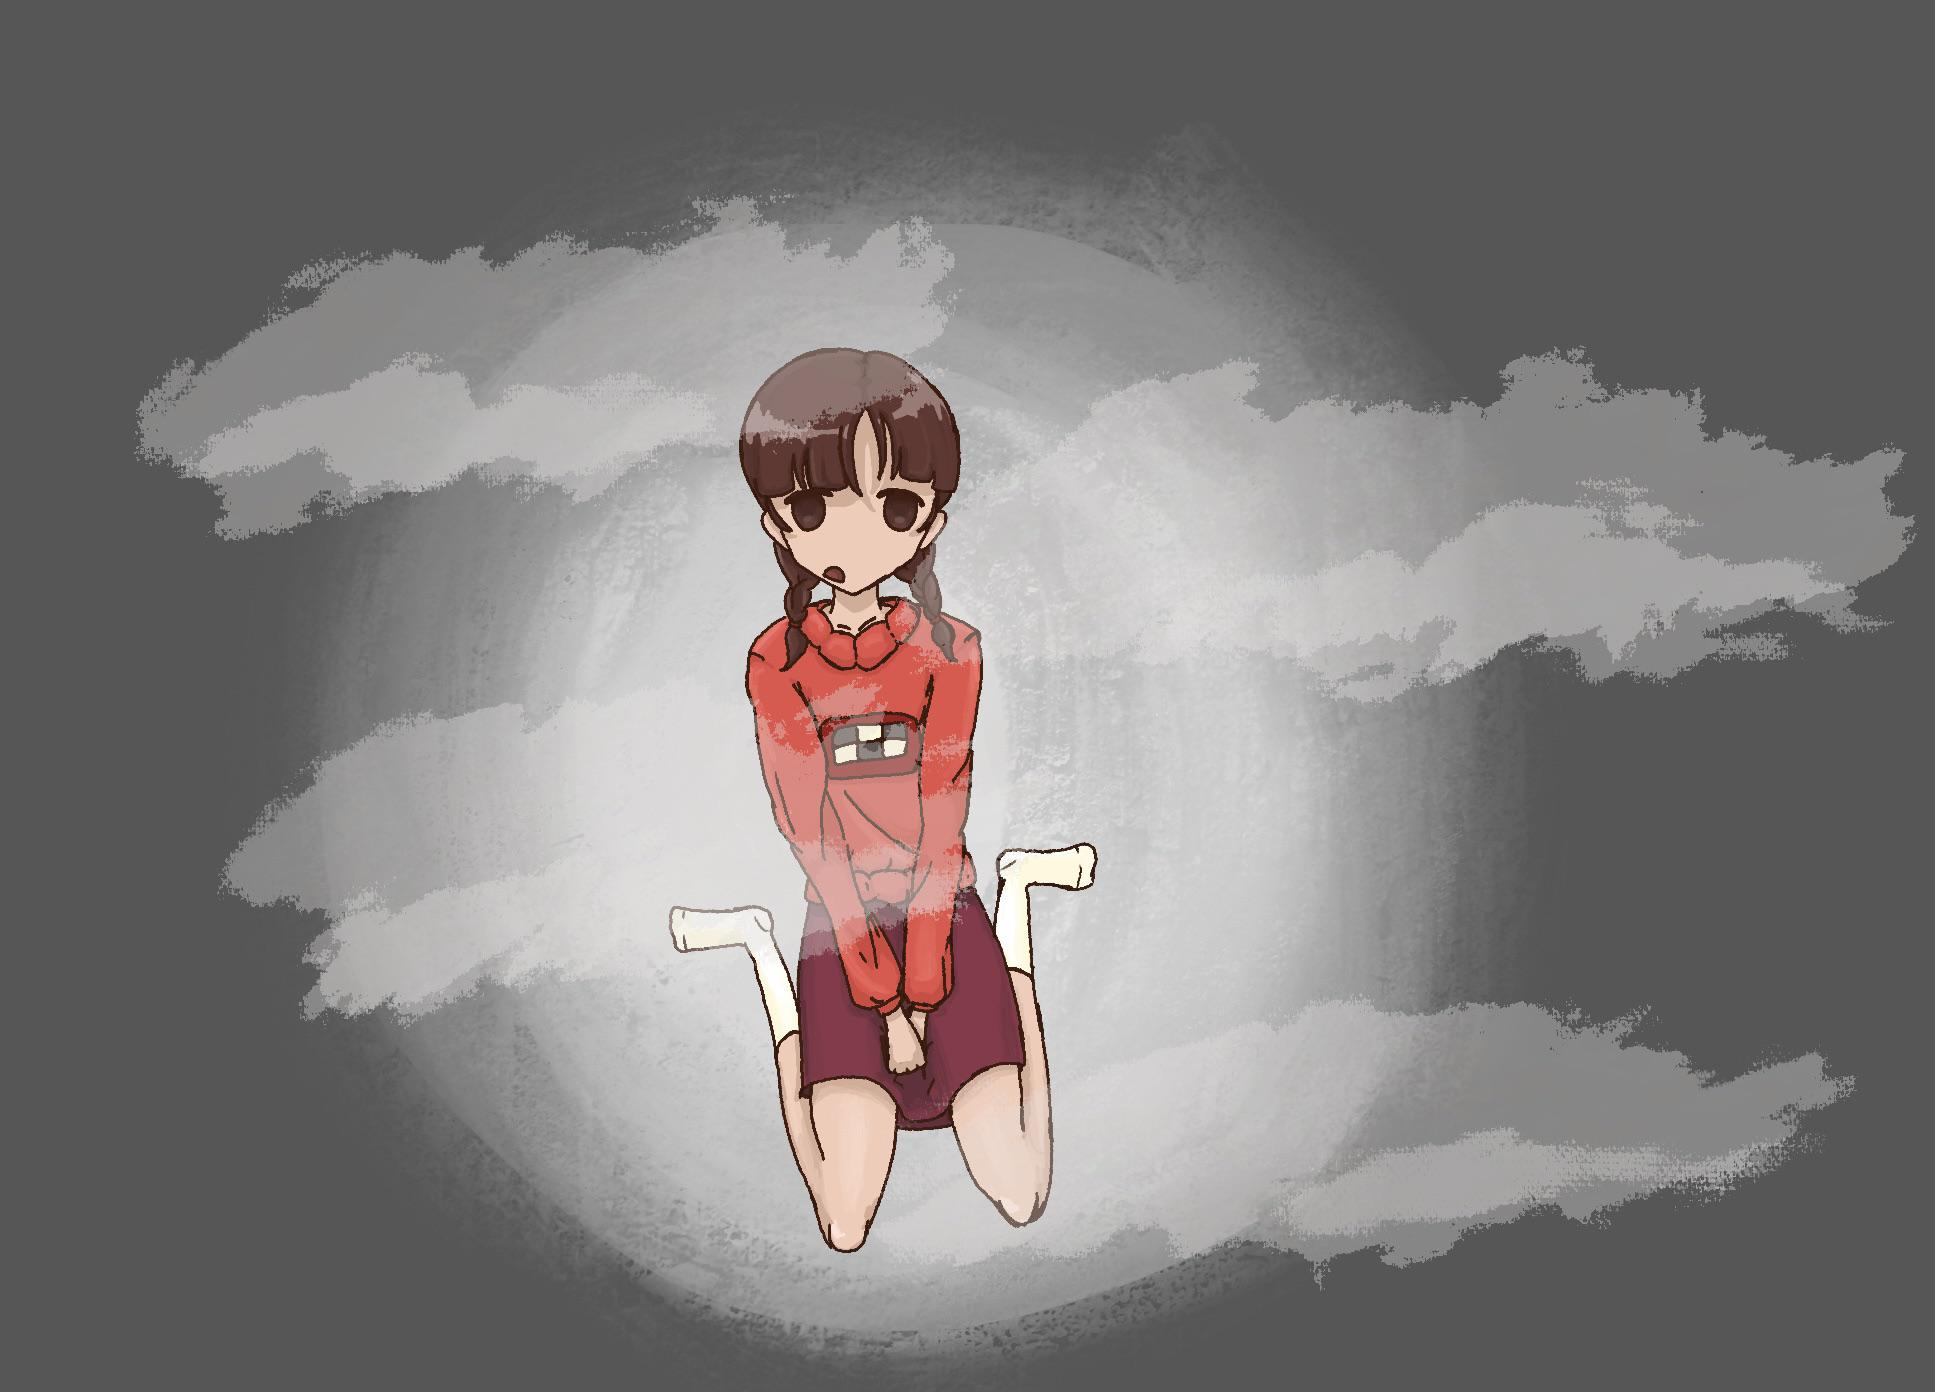 1935x1392 I drew Madotsuki from the game yume nikki. It's quite simple, but I think it looks neat. : r/learntodraw